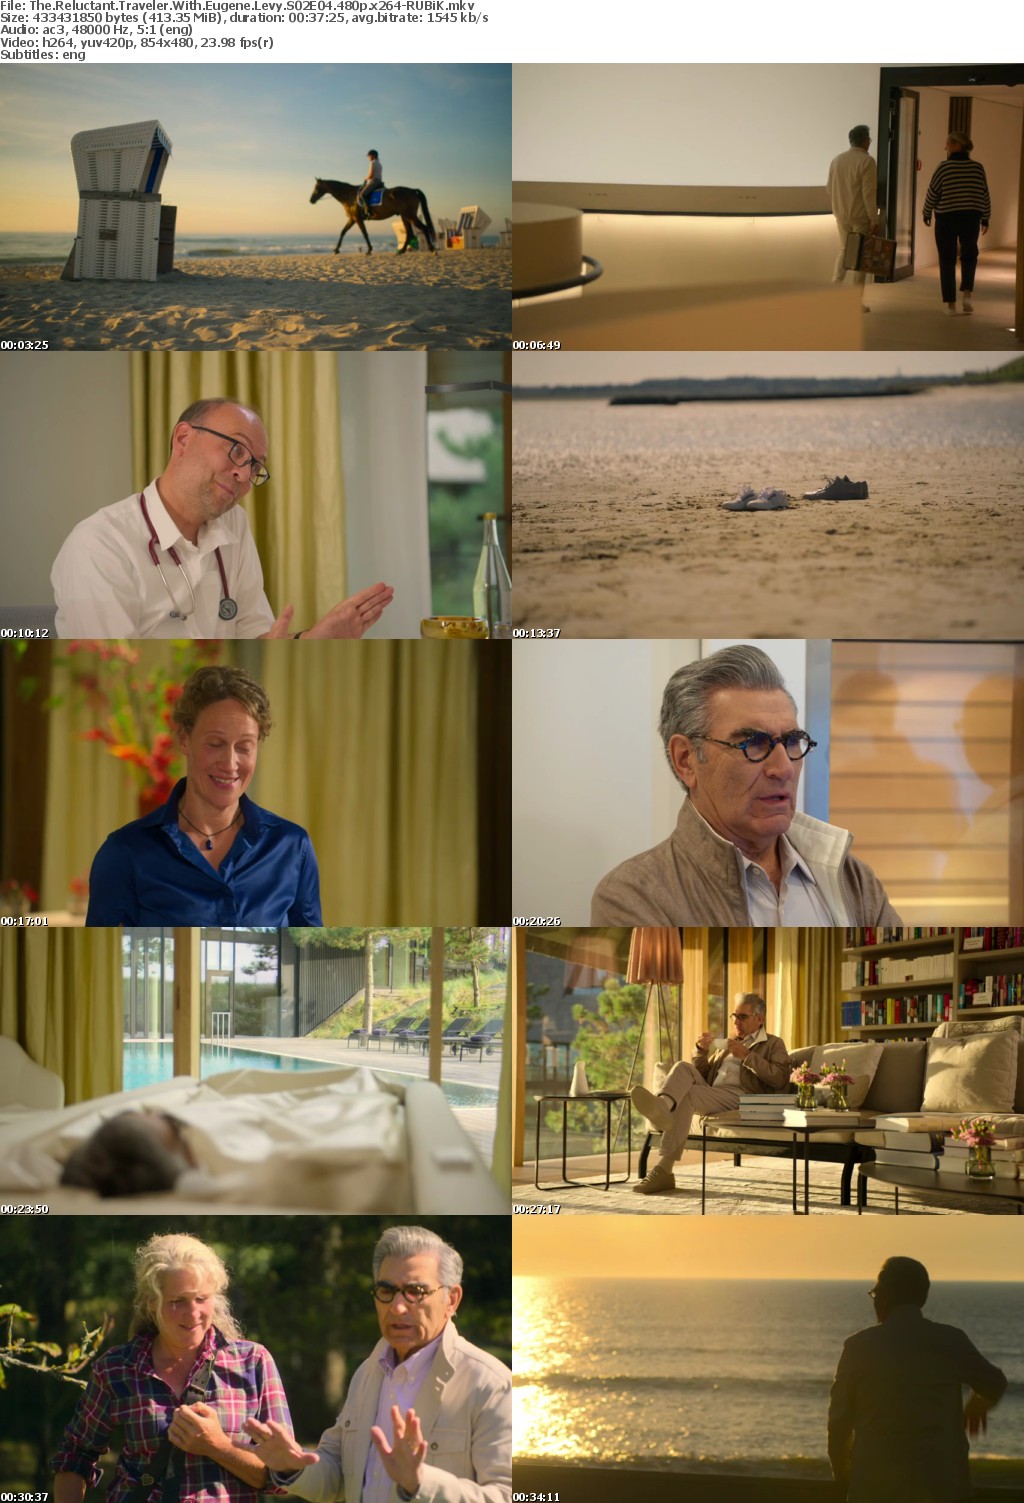 The Reluctant Traveler With Eugene Levy S02E04 480p x264-RUBiK Saturn5